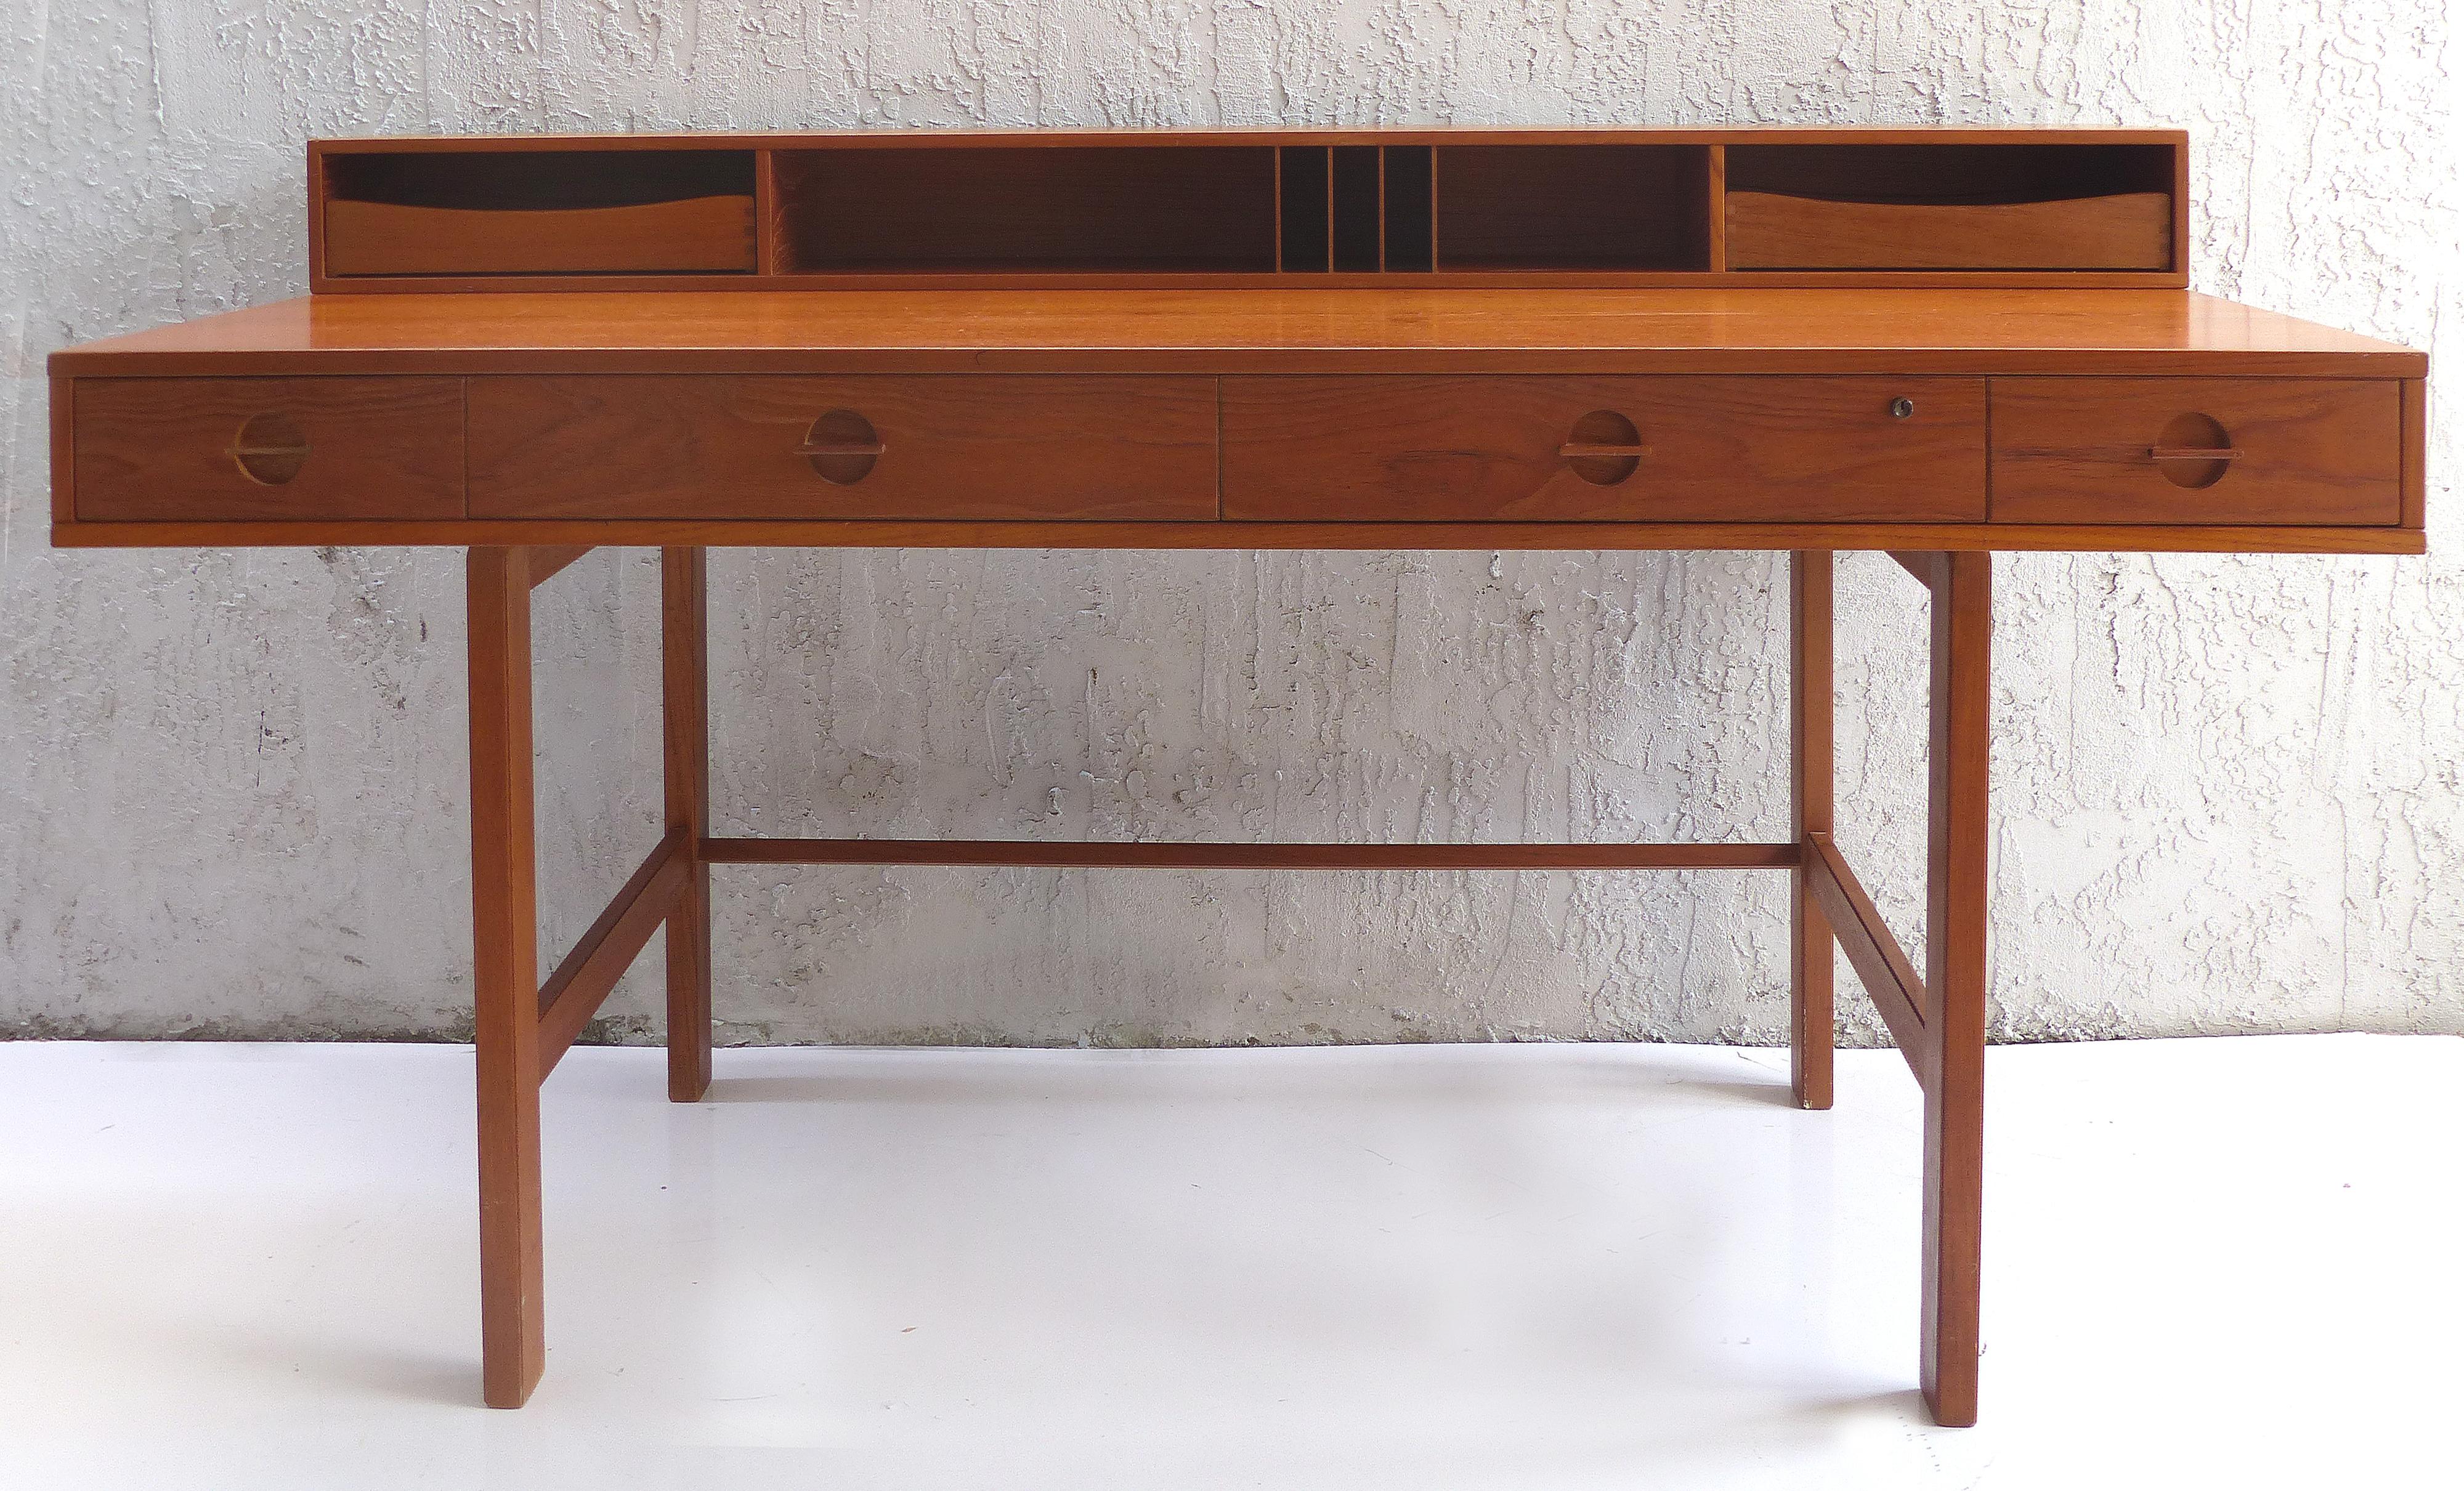 Offered for sale is an iconic Danish modern teak desk by Jens Quistgaard of Dansk for Peter Løvig Nielsen. The desk offers a very practical hinged gallery to top that flips down to expand into a partners desk or extended work surface. Measure: